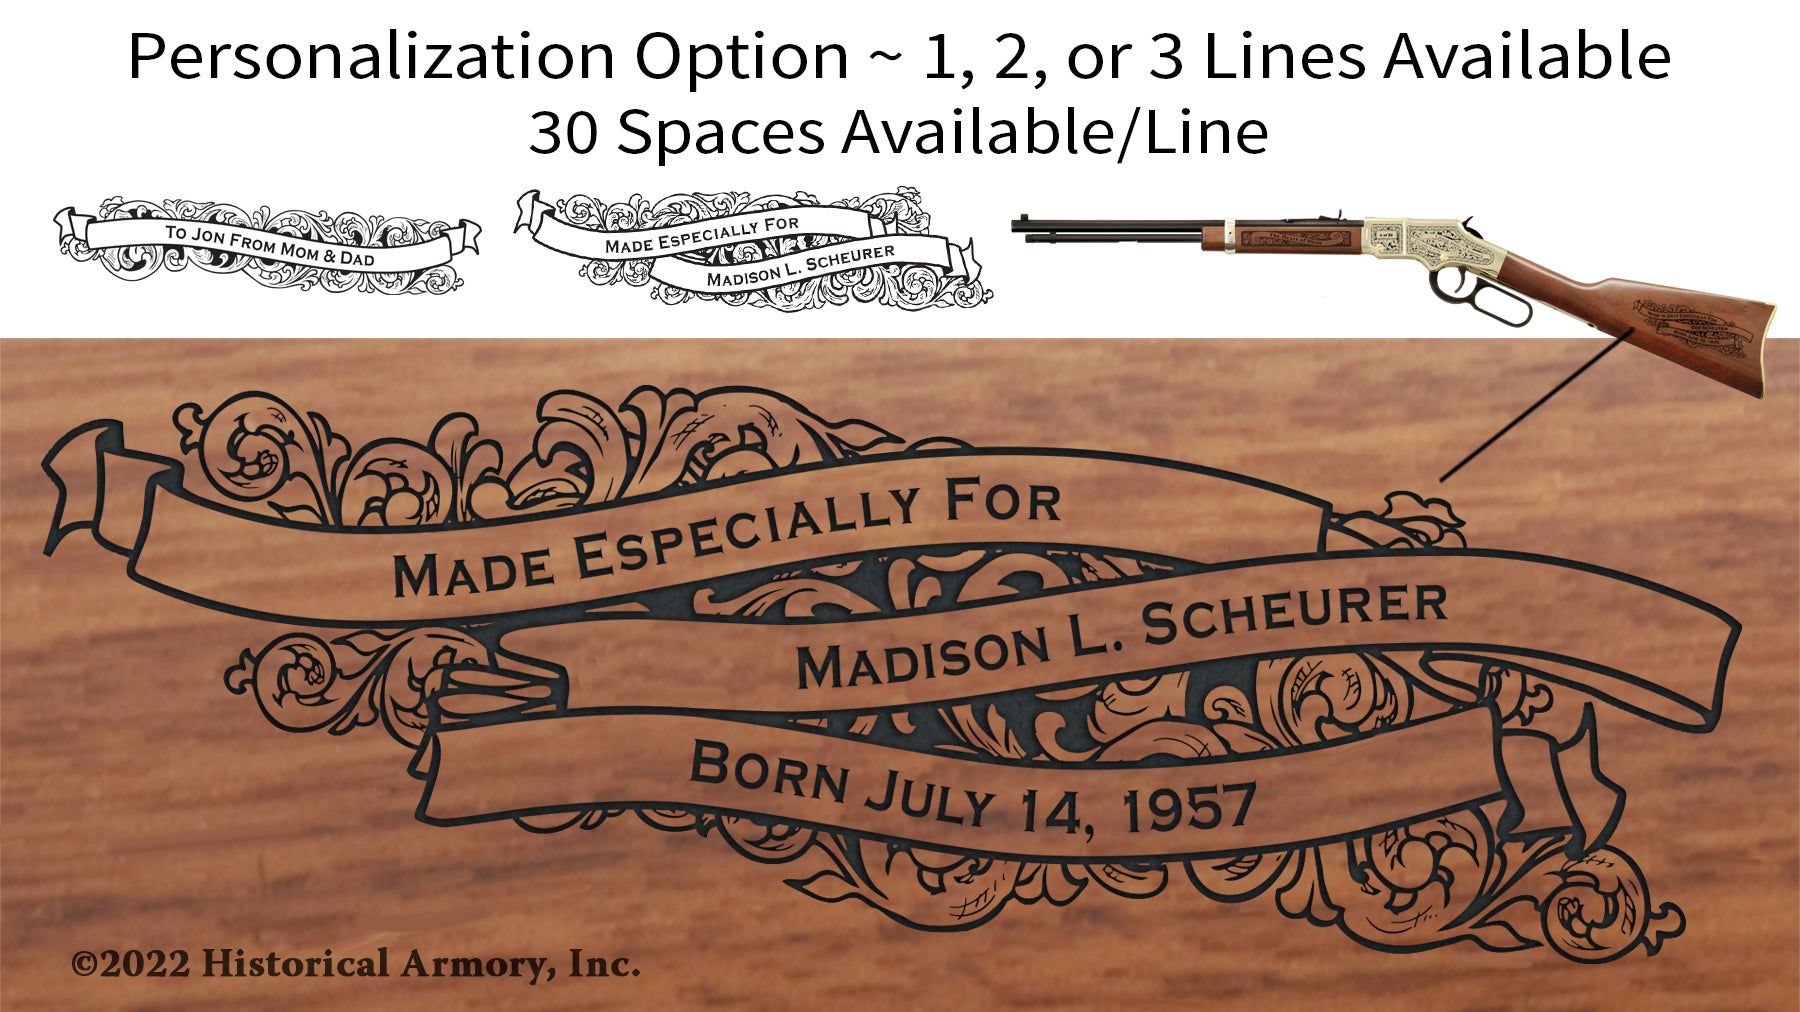 Licking County Ohio Engraved Rifle Personalization